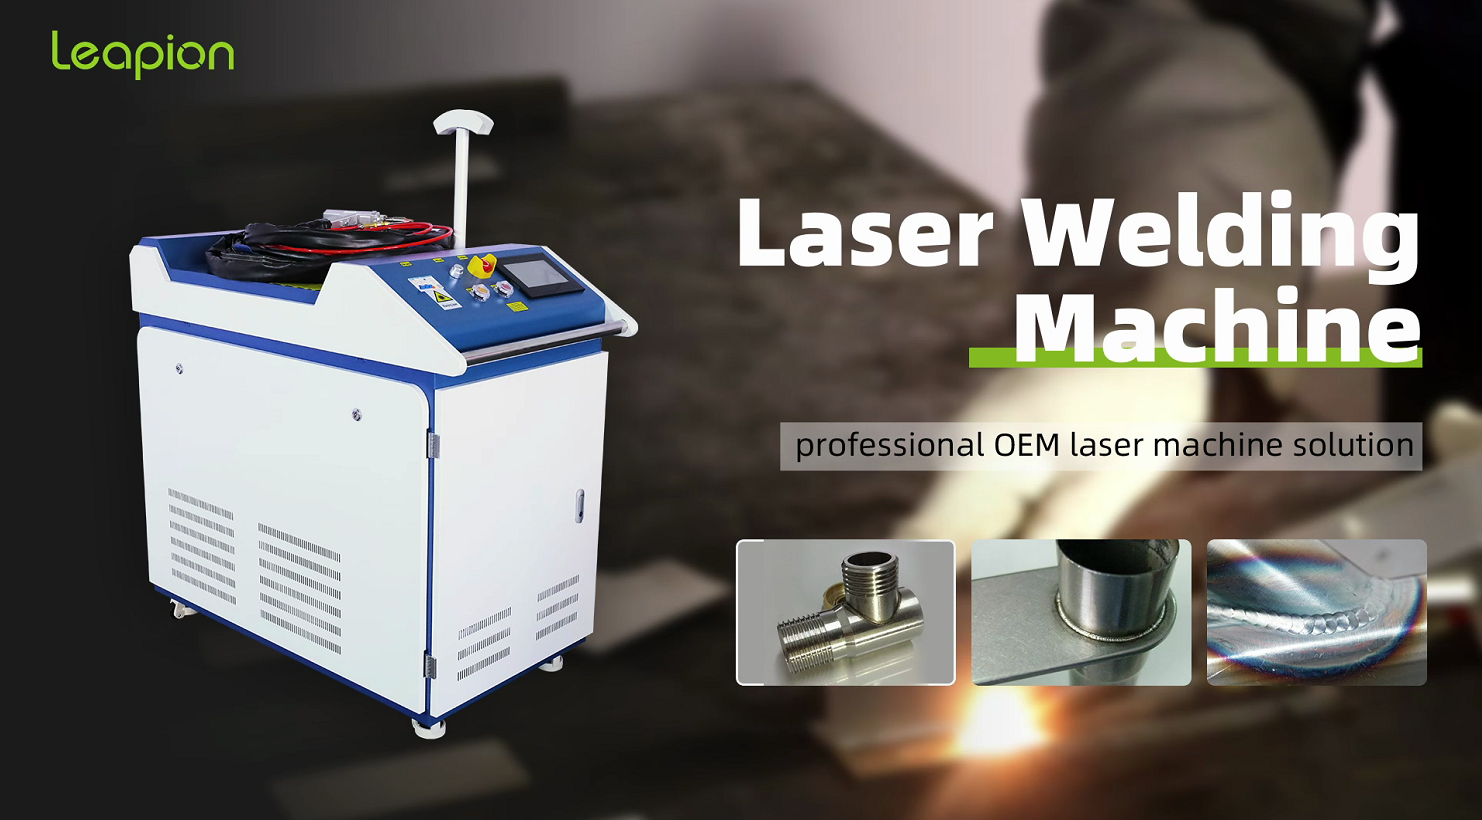 What has to be considered when laser welding specific materials?